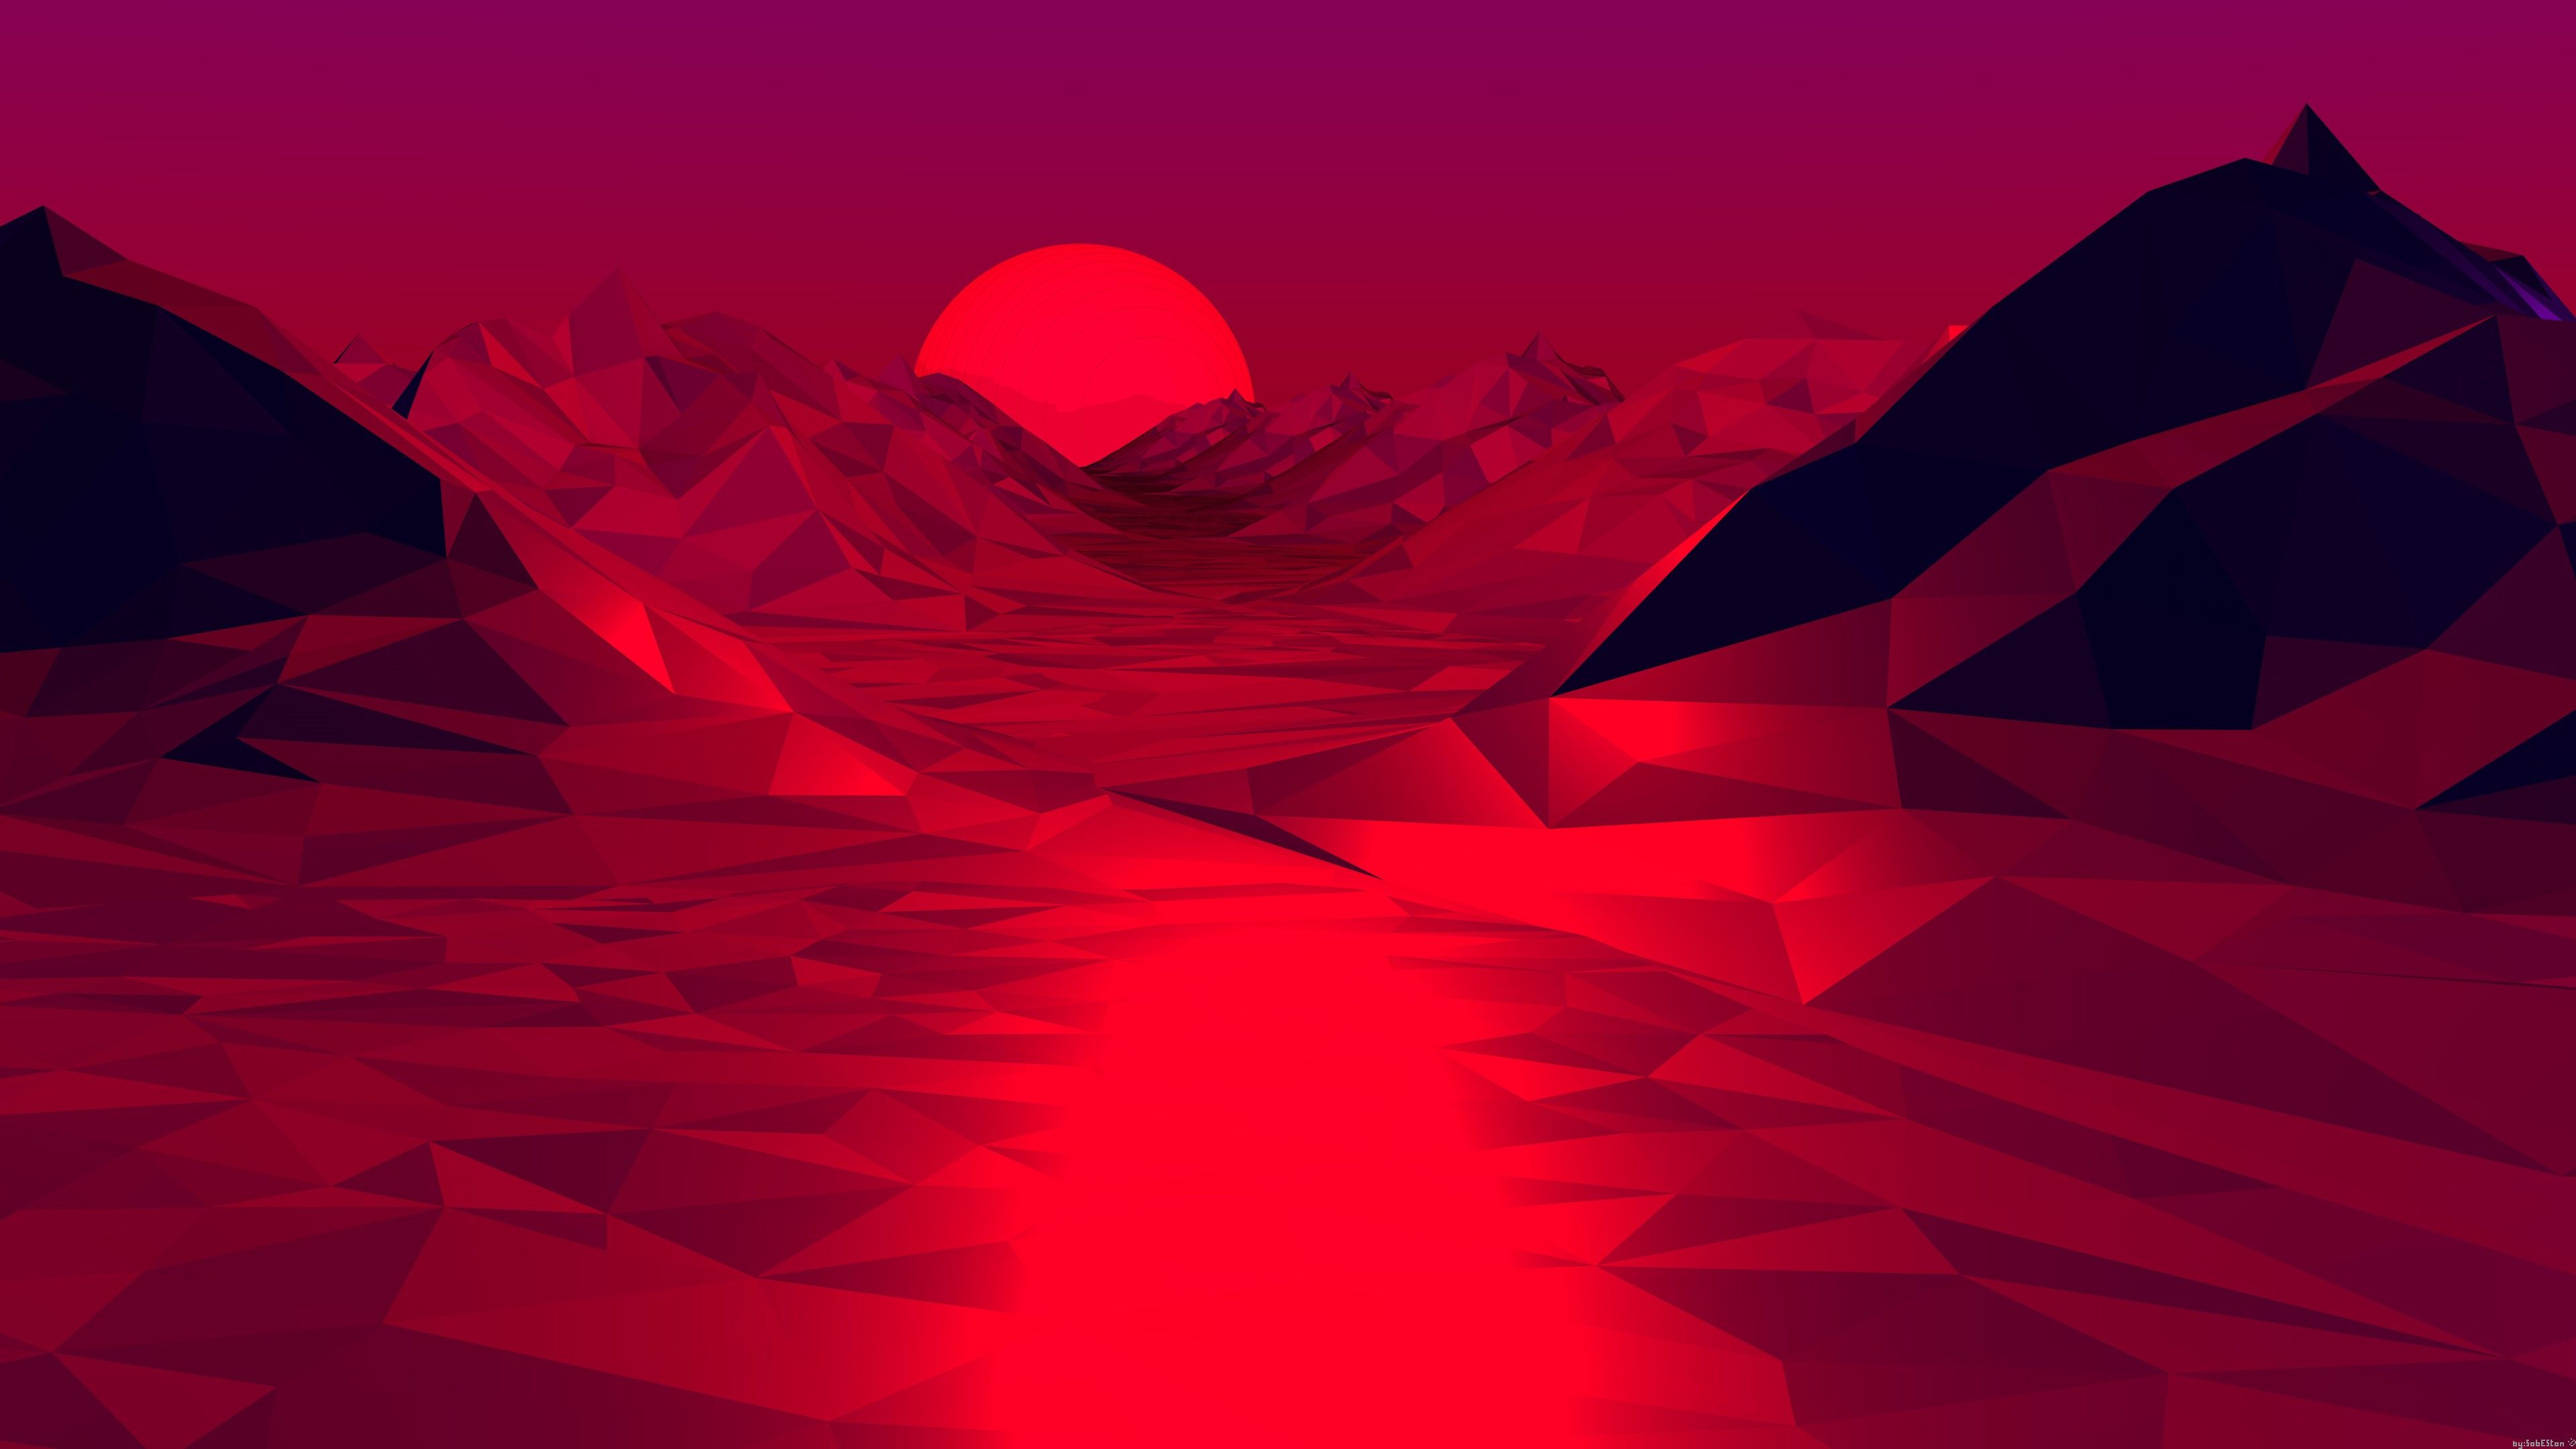 A red sunset over mountains with water - Low poly, abstract